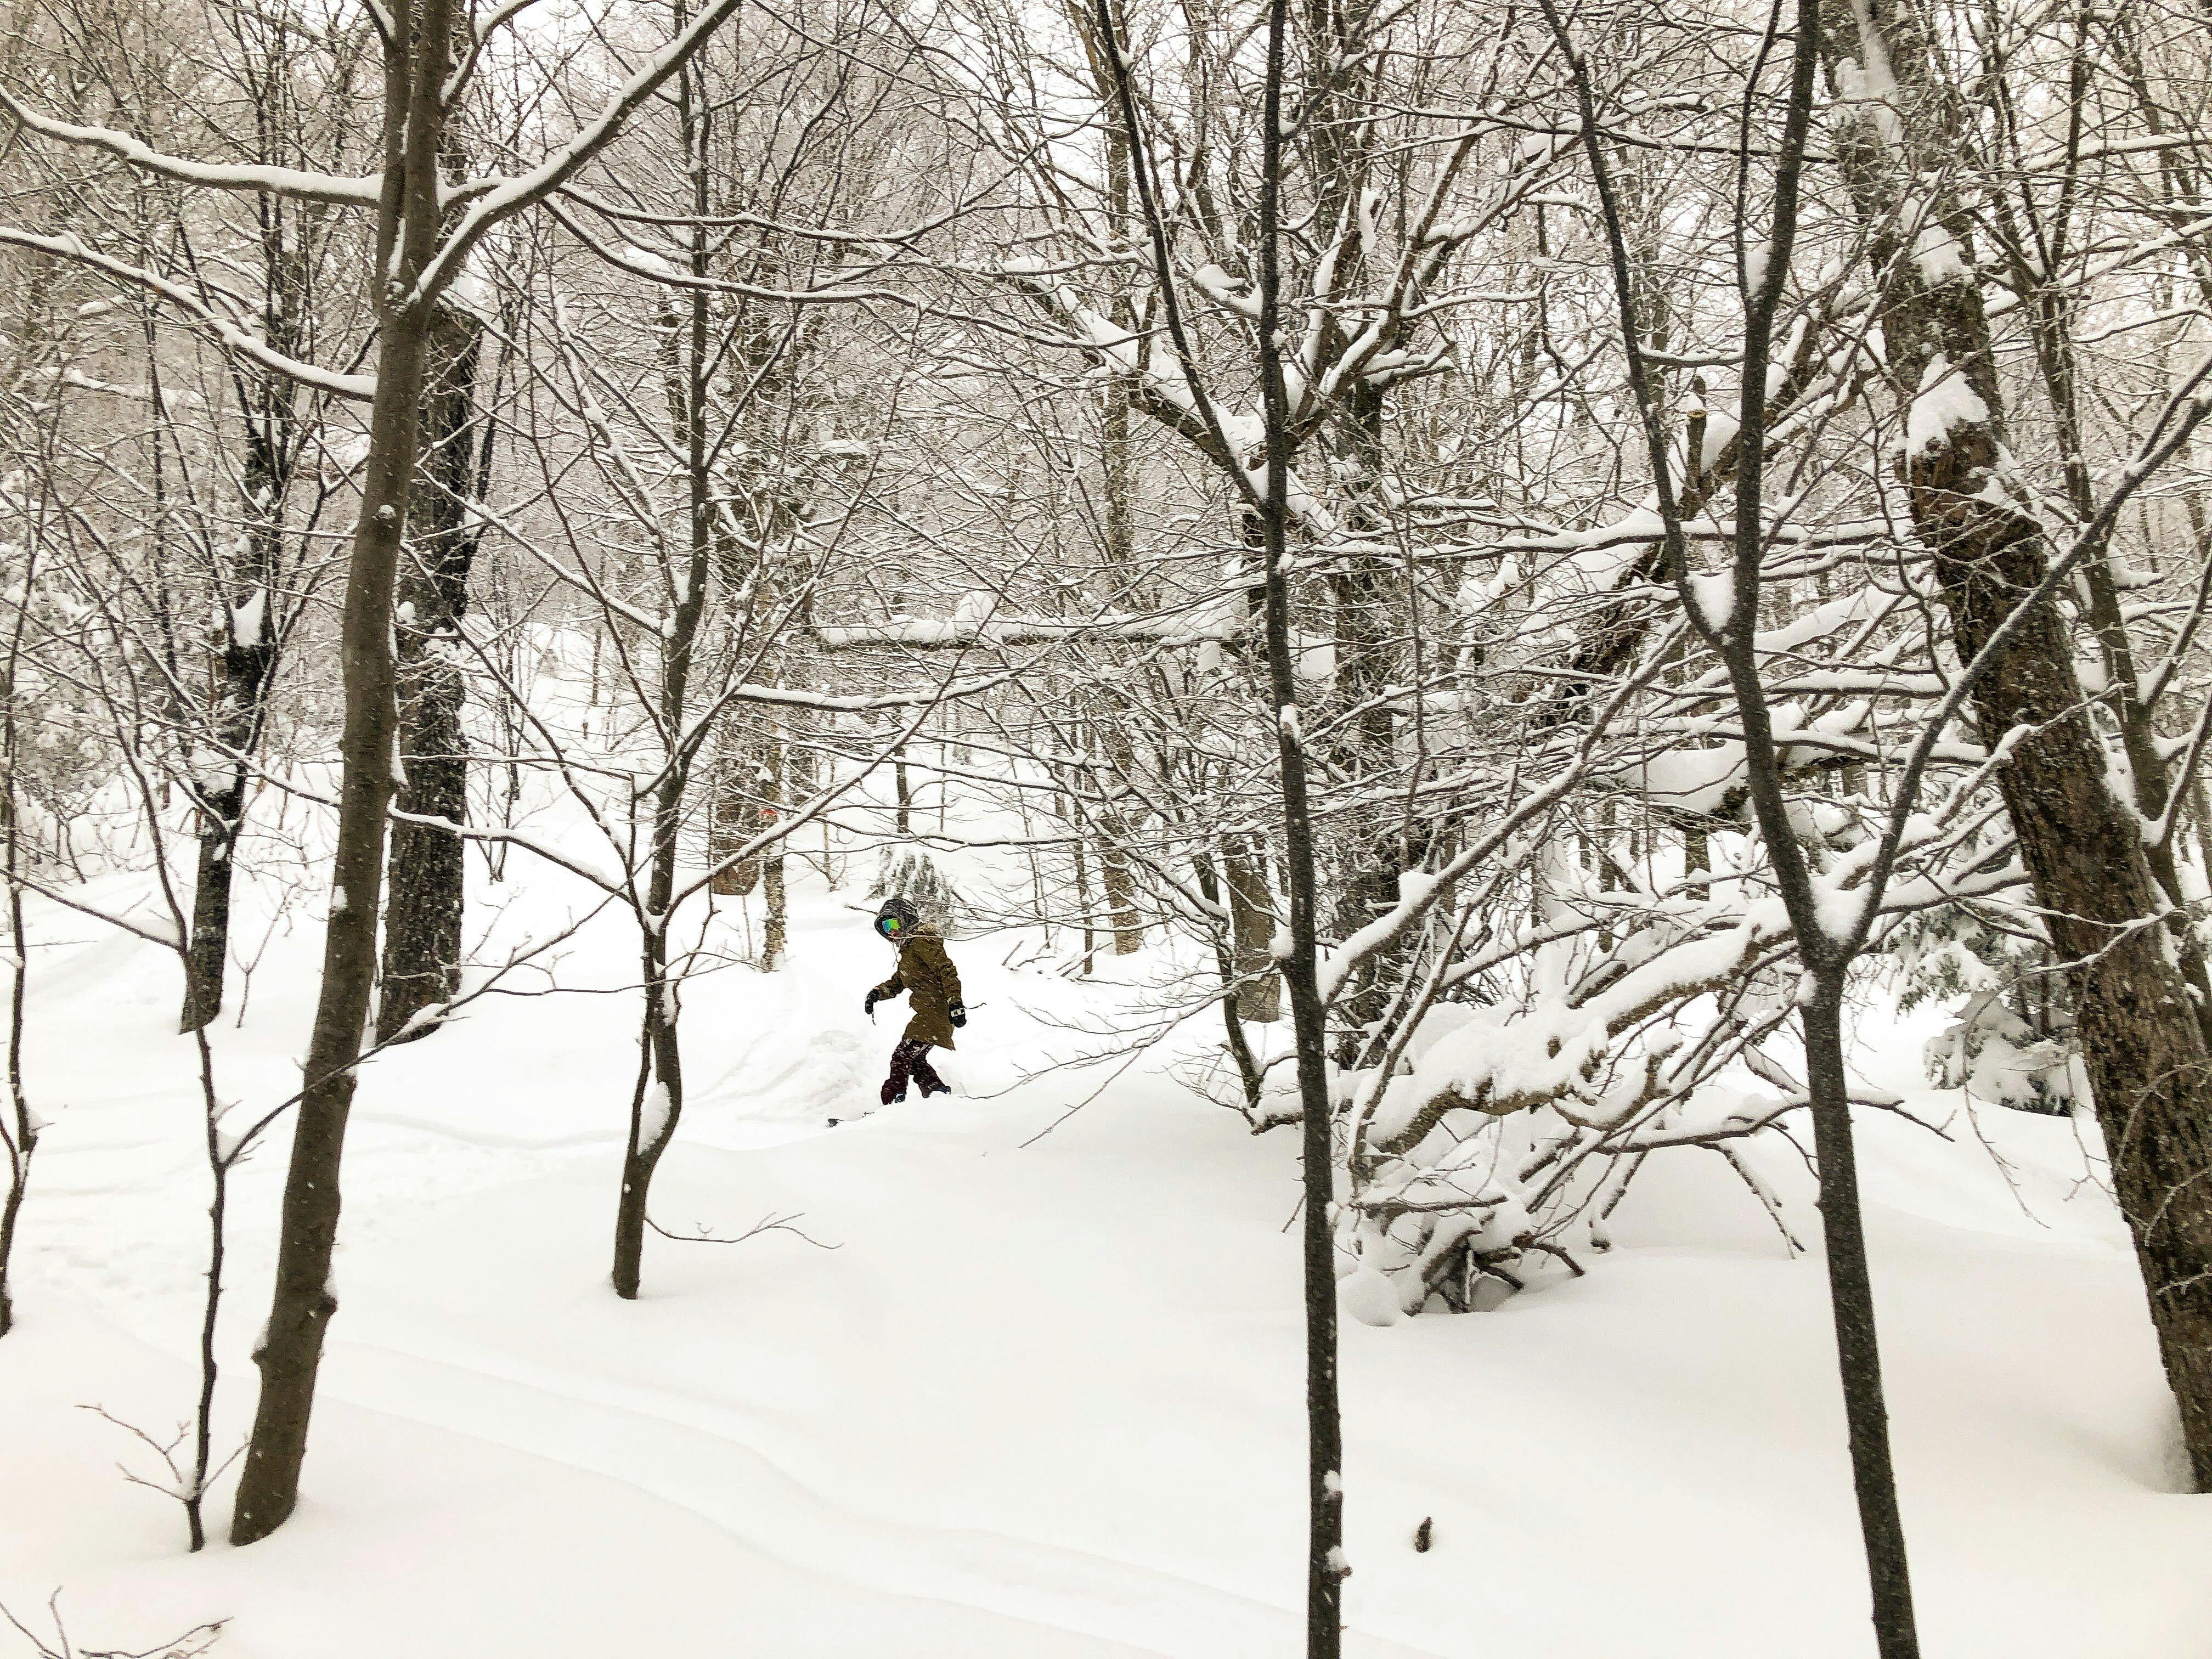 A snowboarder riding down through a forest.